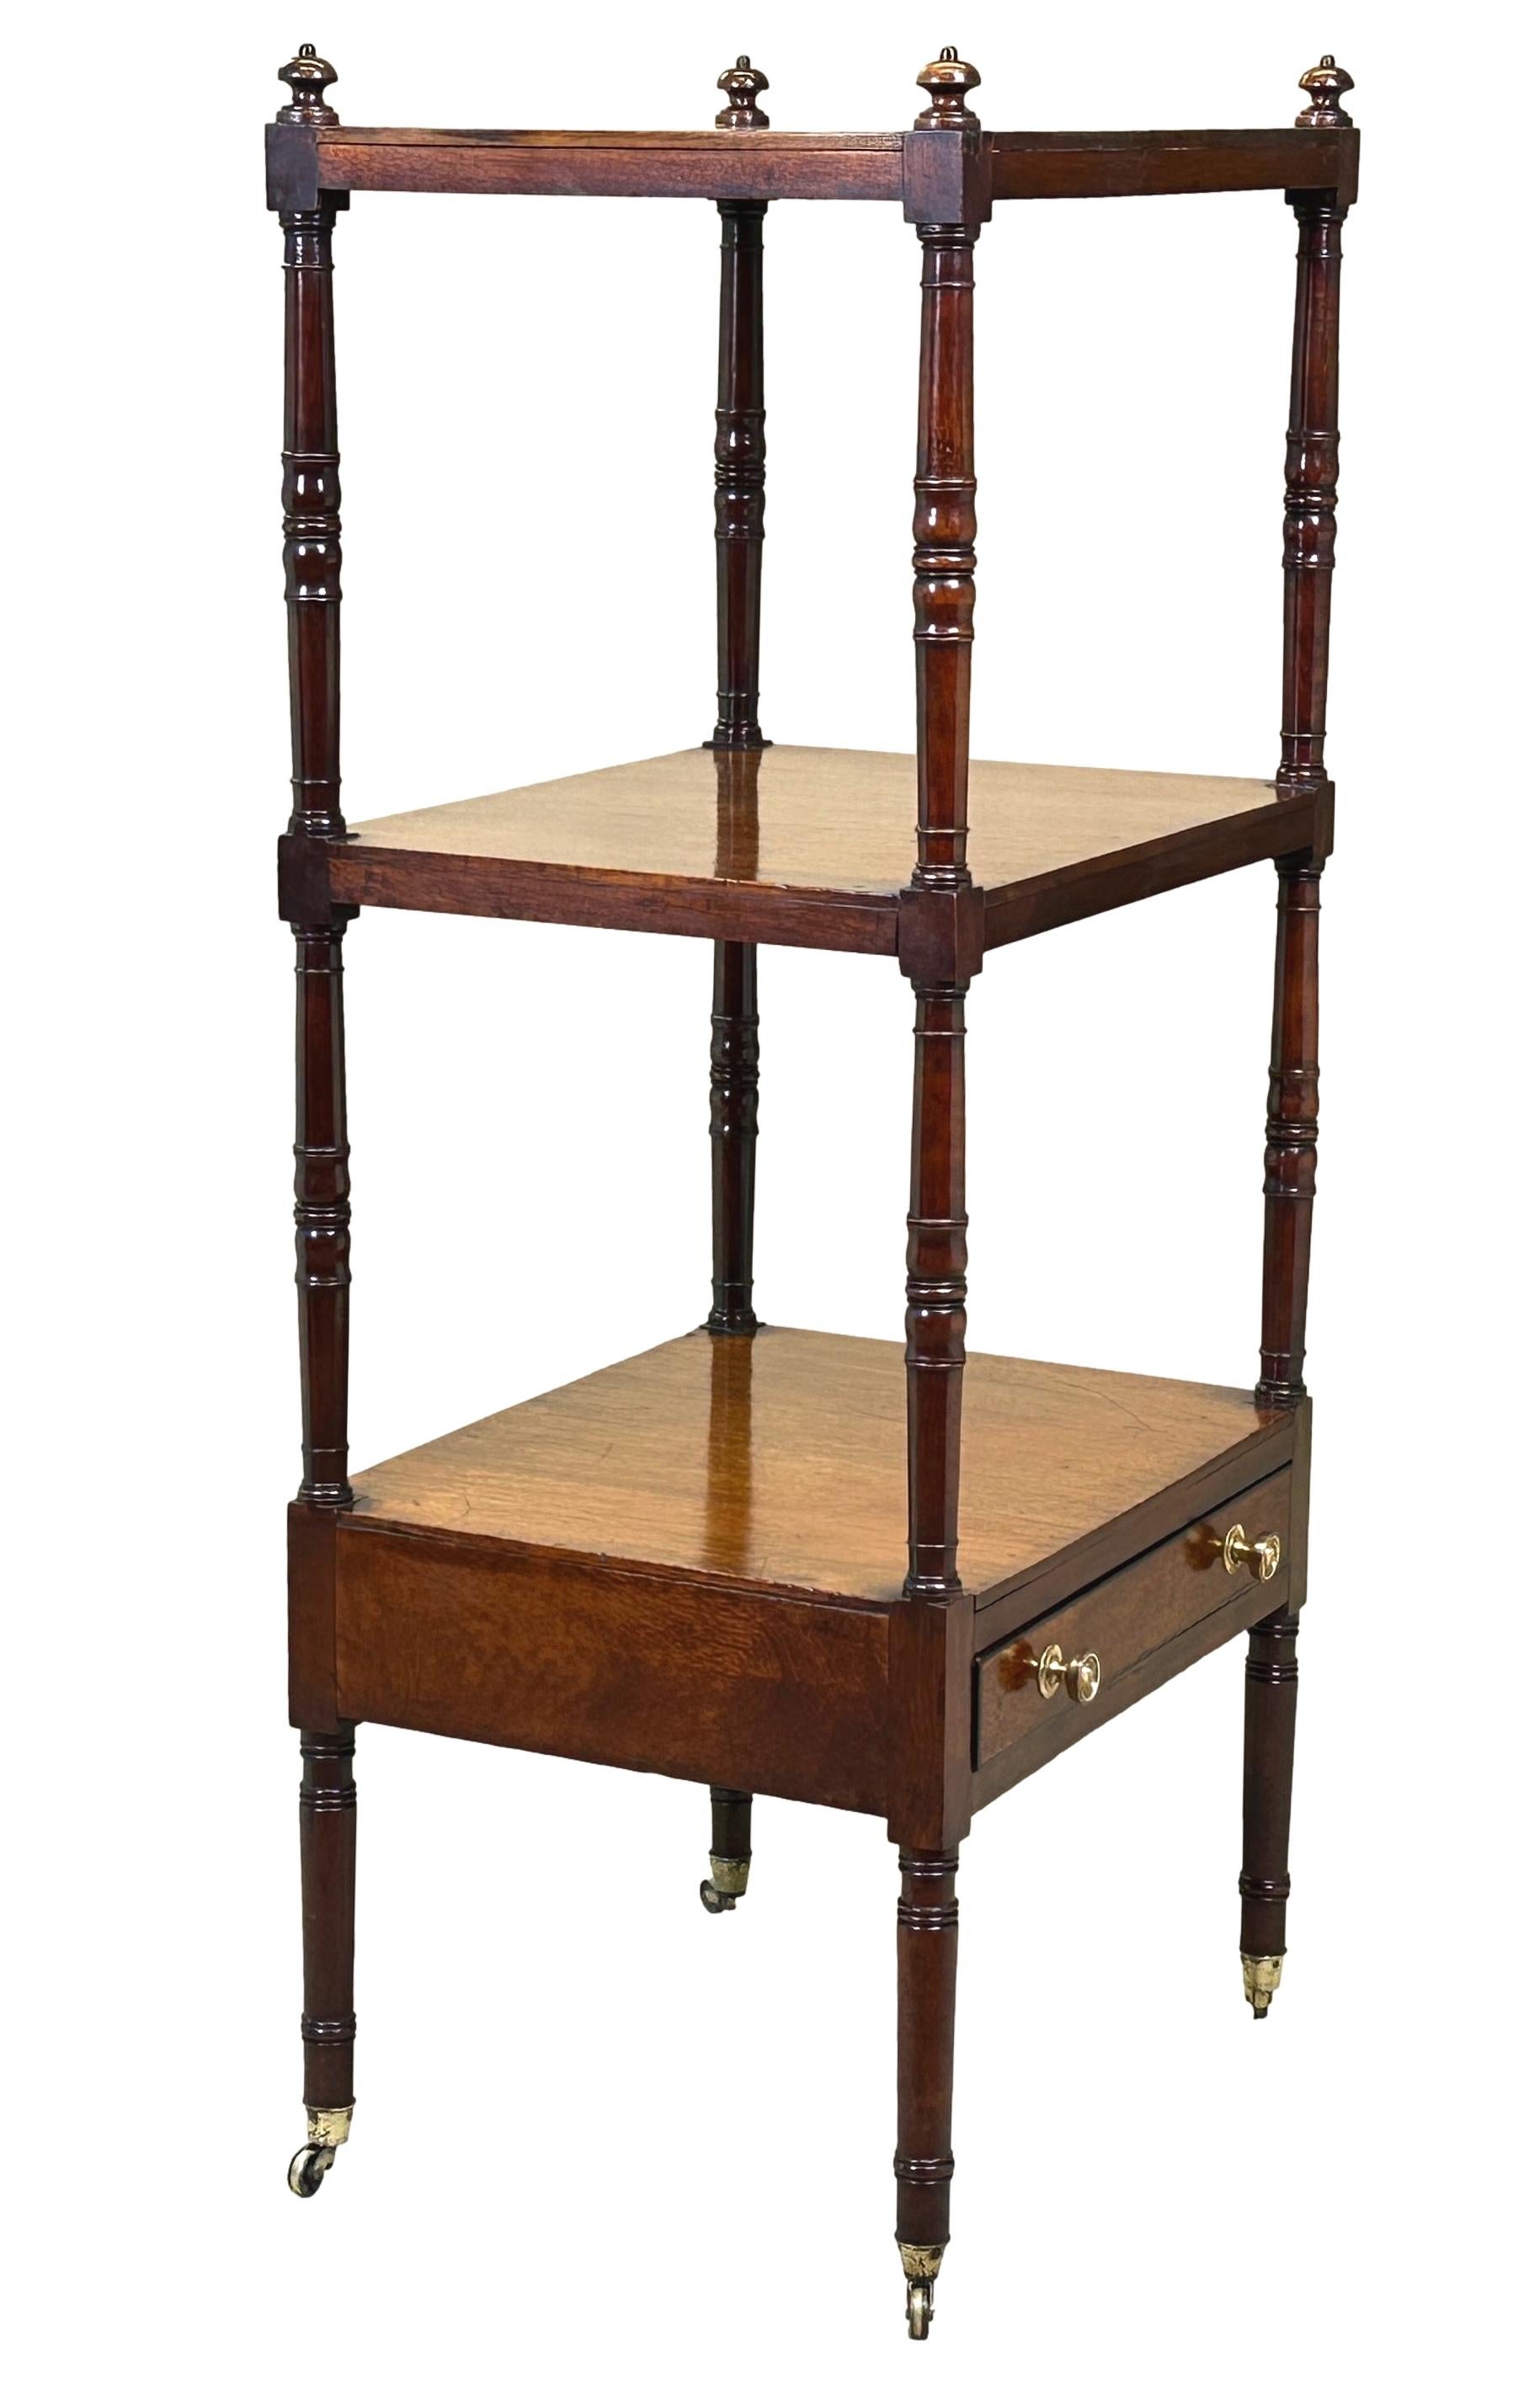 A fine quality, 18th century, George III Period mahogany whatnot of charming small proportion, having three well figured rectagular tiers, United by turned upright supports and one frieze drawer, raised on extremely elegant tall turned legs